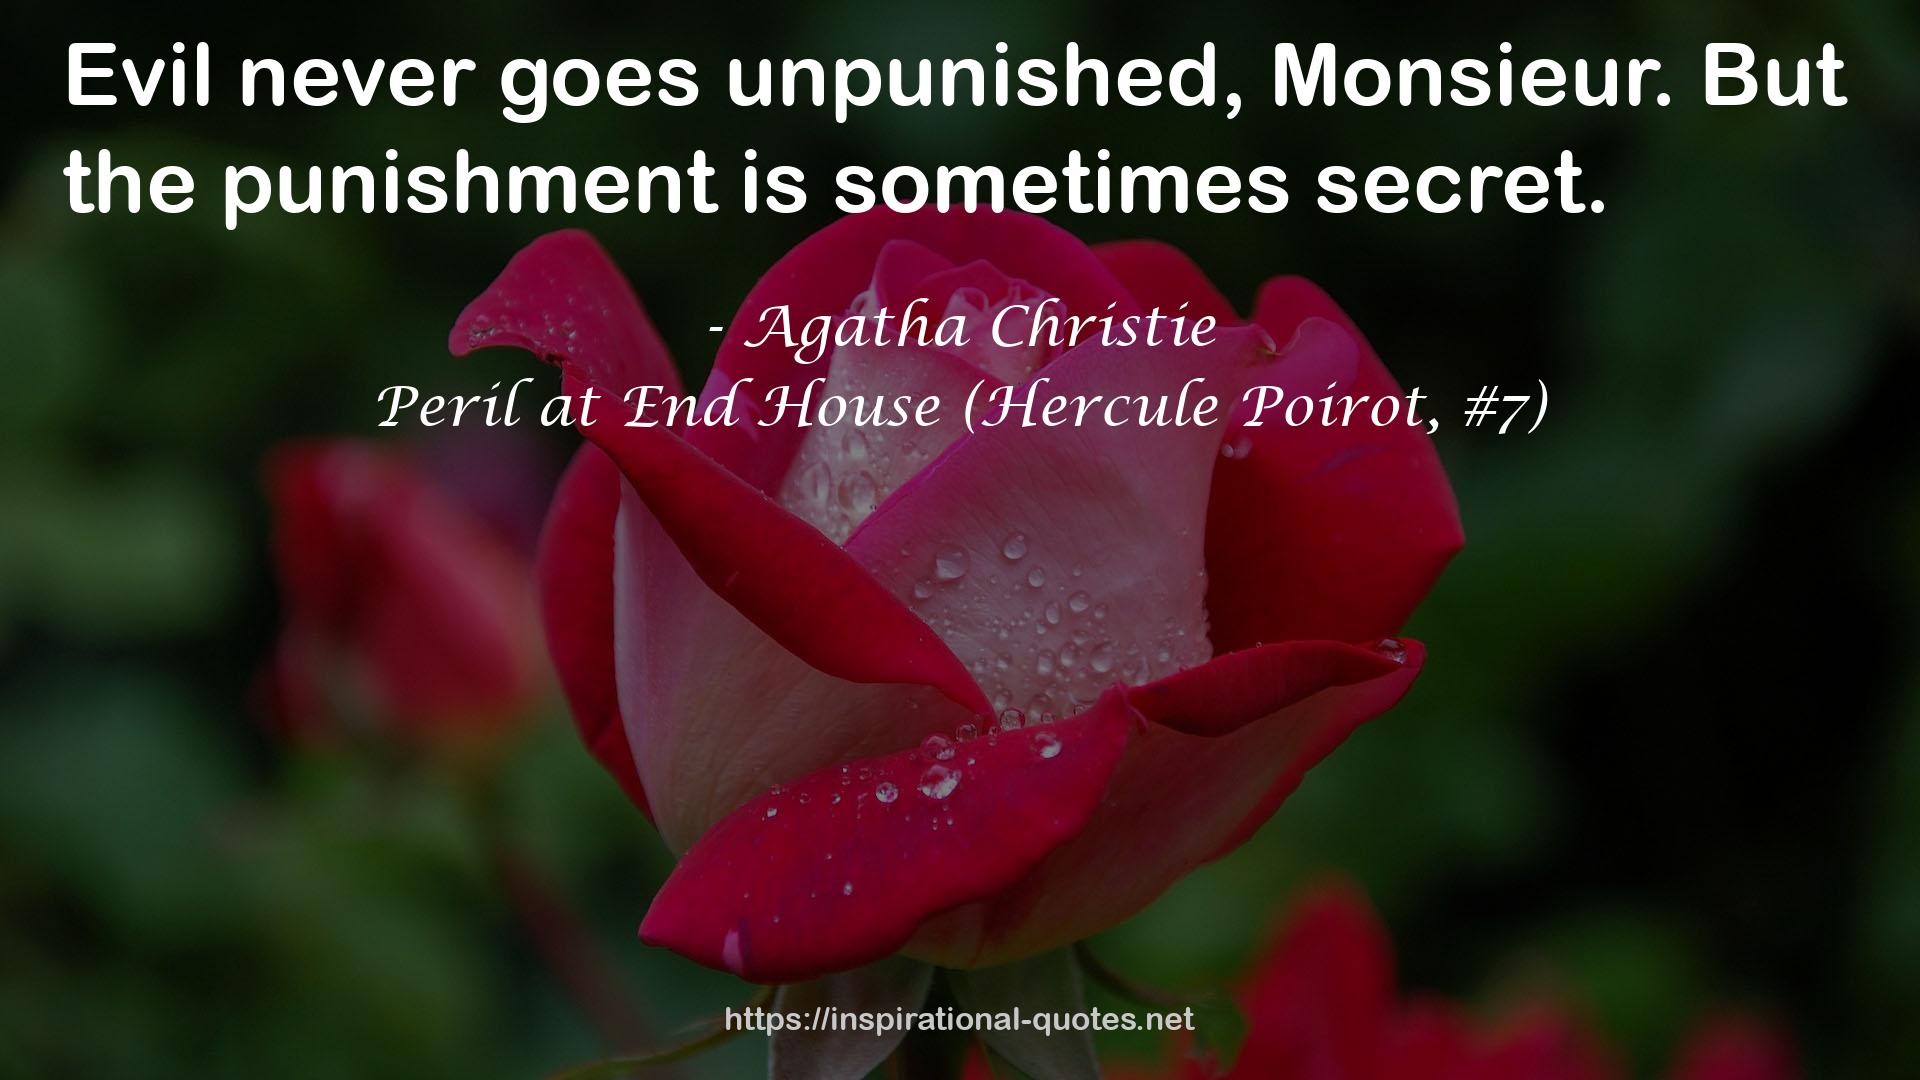 Peril at End House (Hercule Poirot, #7) QUOTES